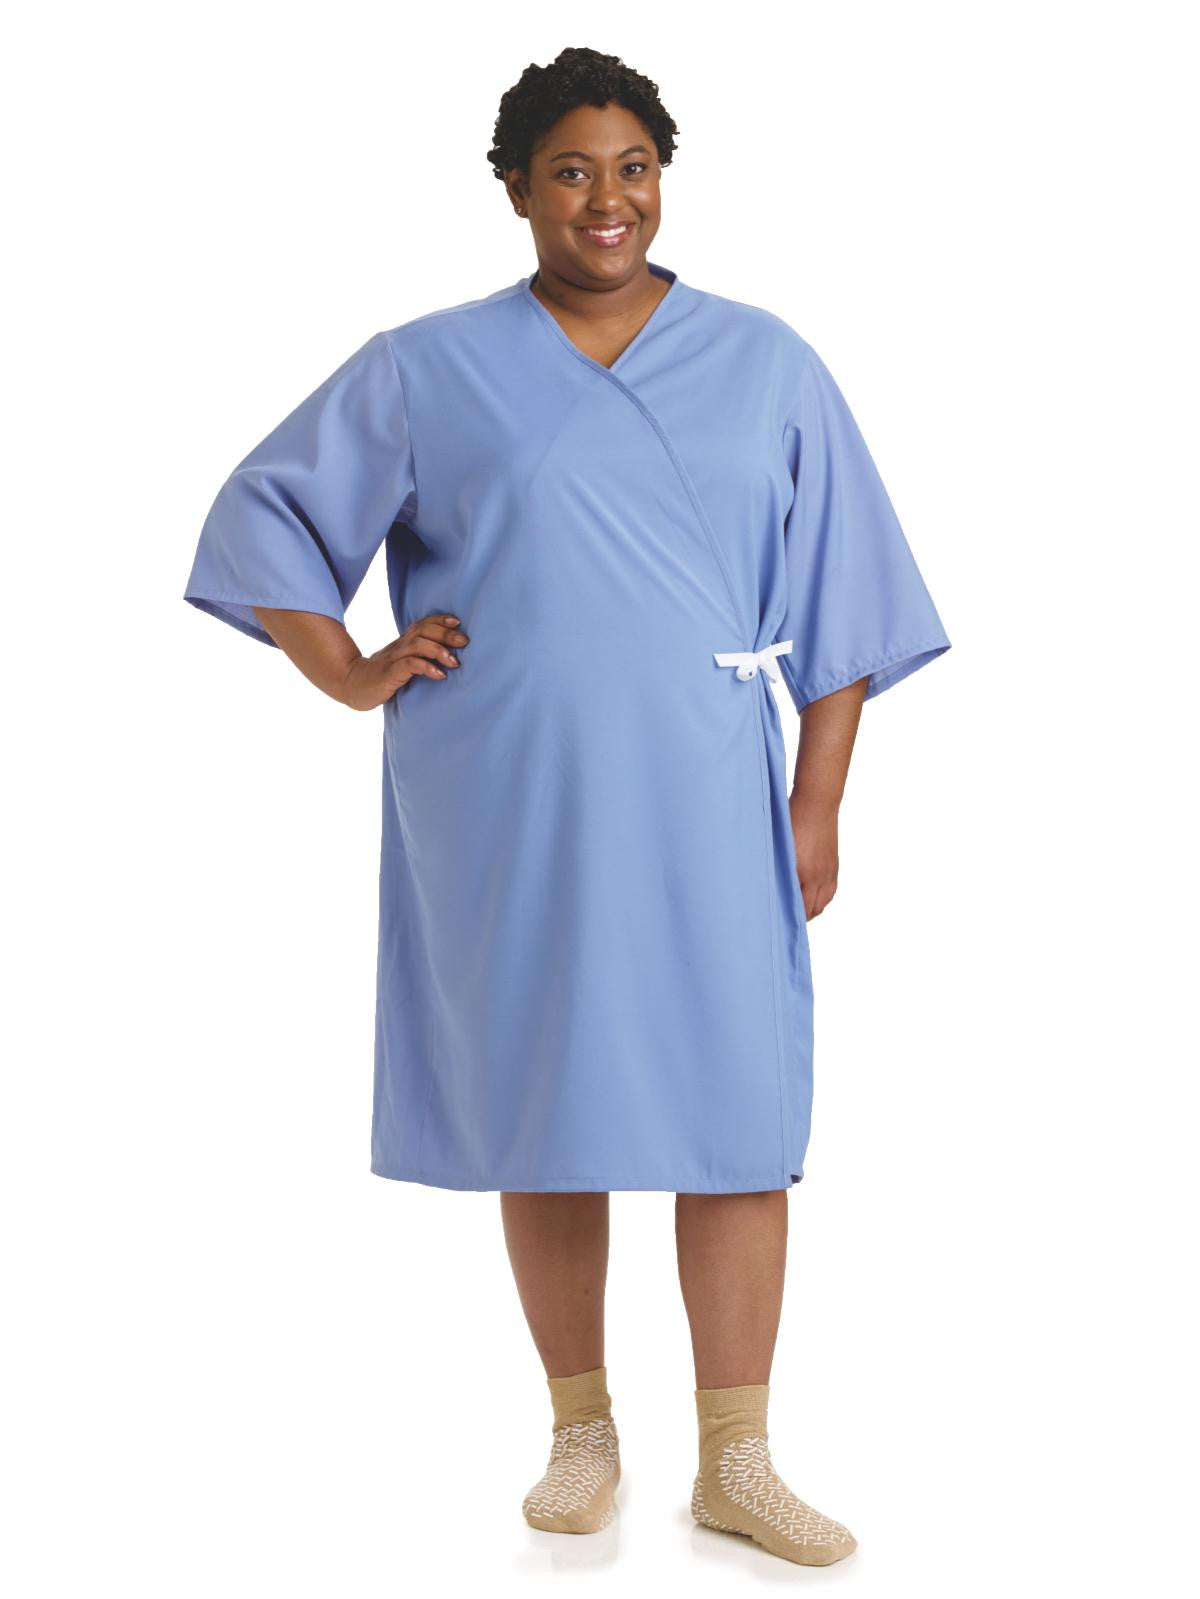 Top more than 135 hospital gowns with snaps latest